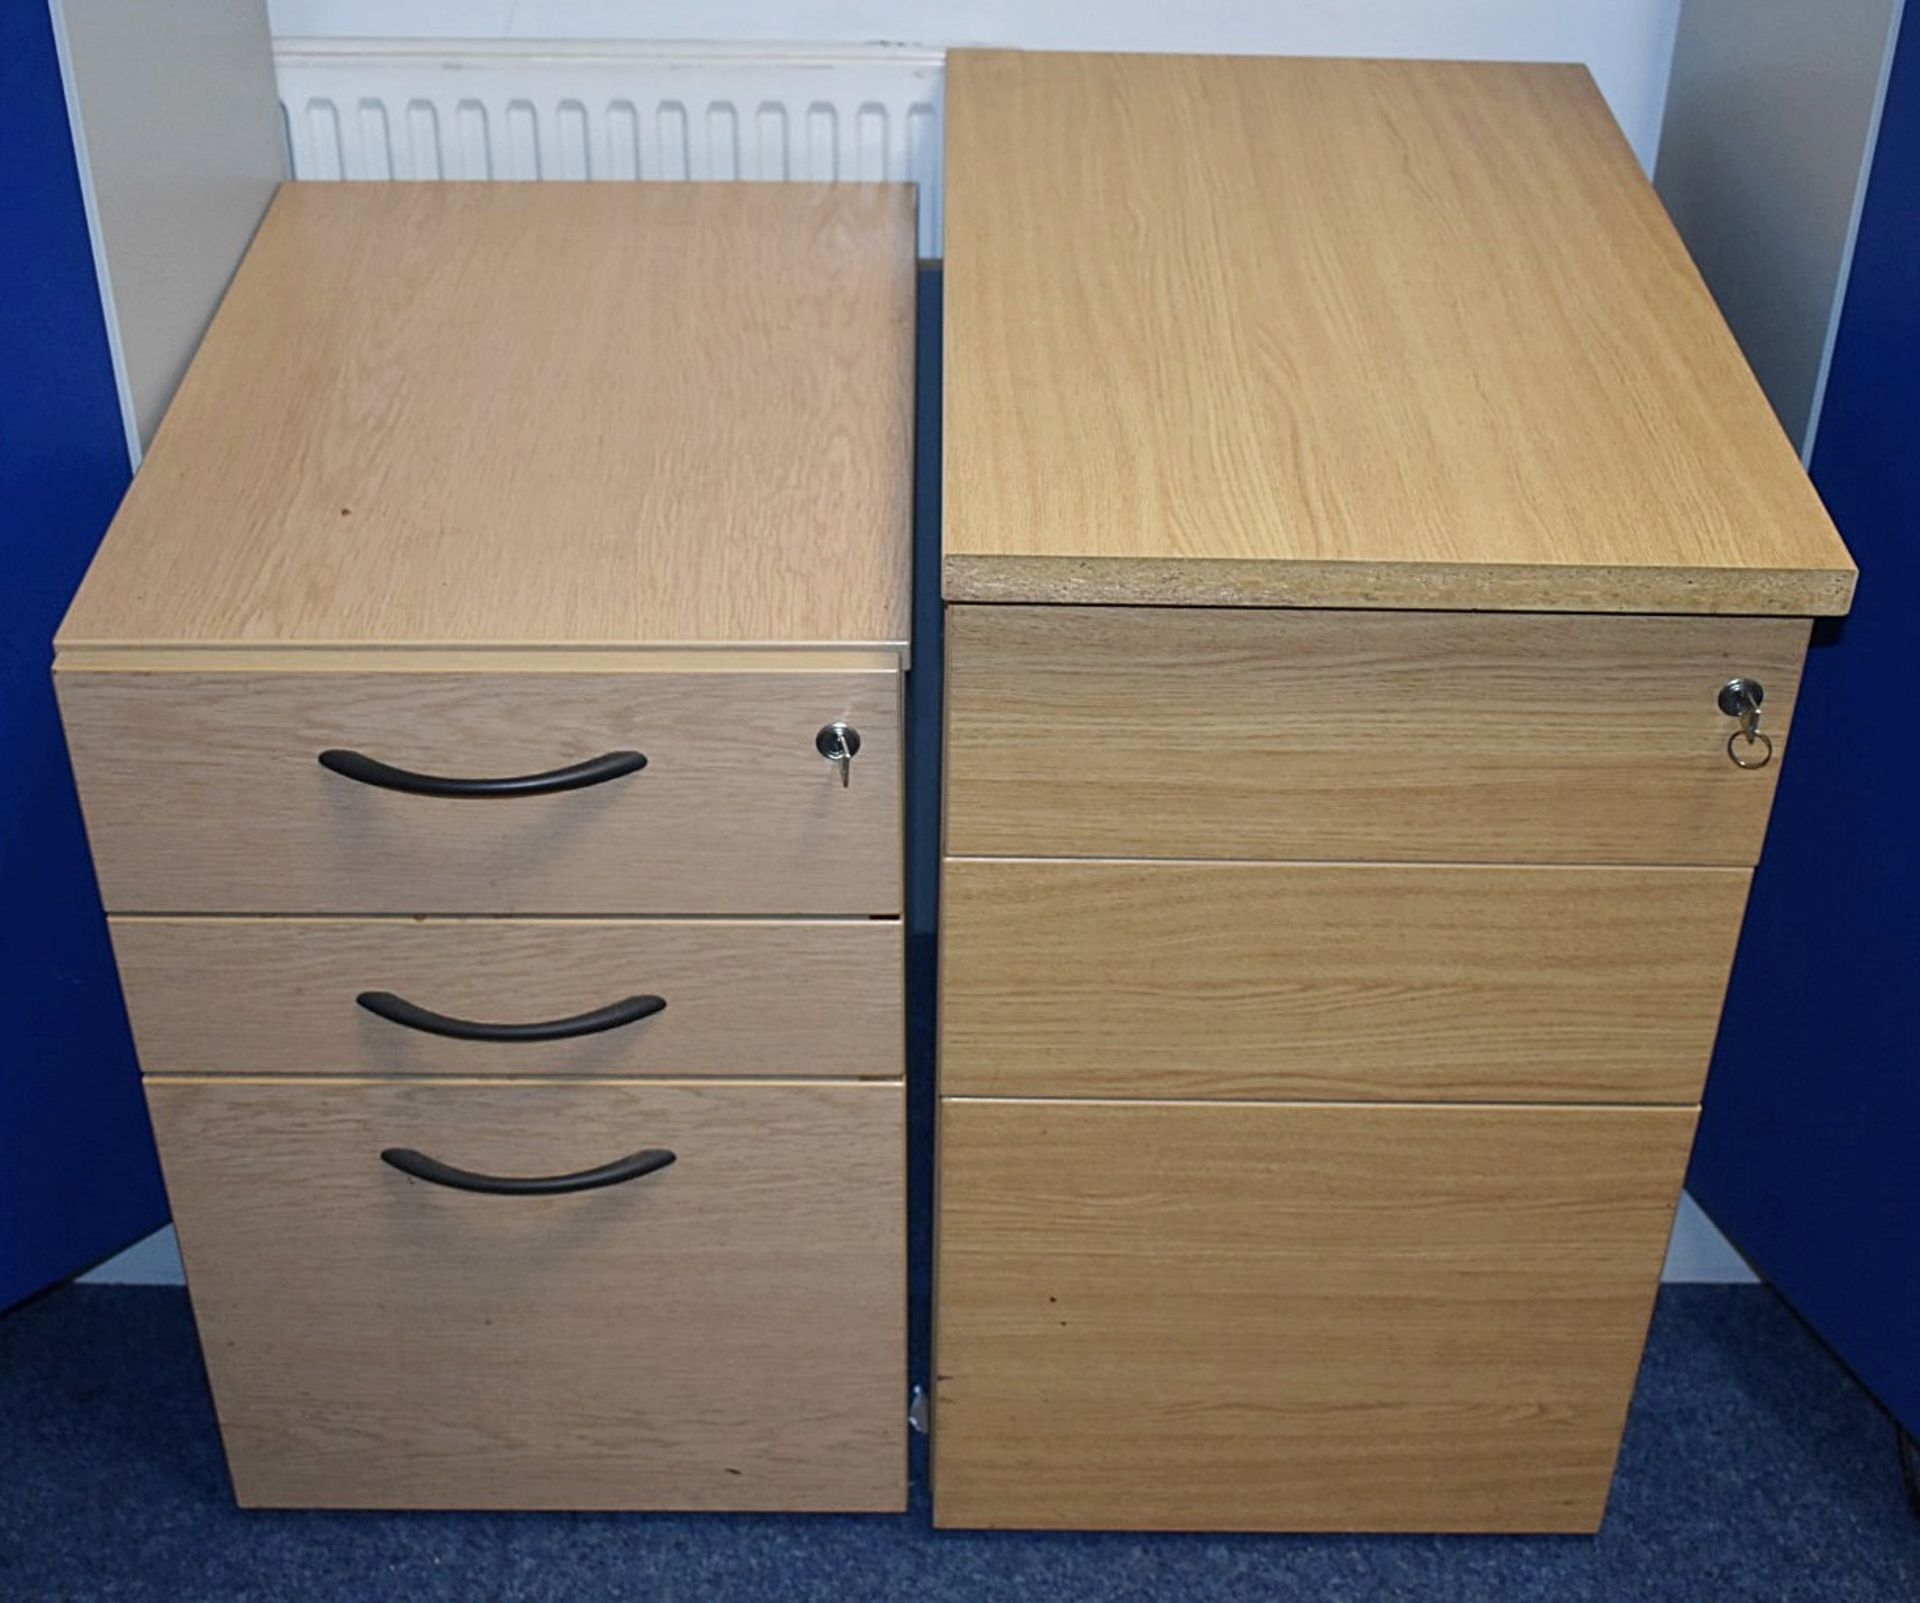 10 x Assorted Pieces of Office Furniture Including Tables and Drawer Pedestals - Ref FE218 ODS - - Image 3 of 9